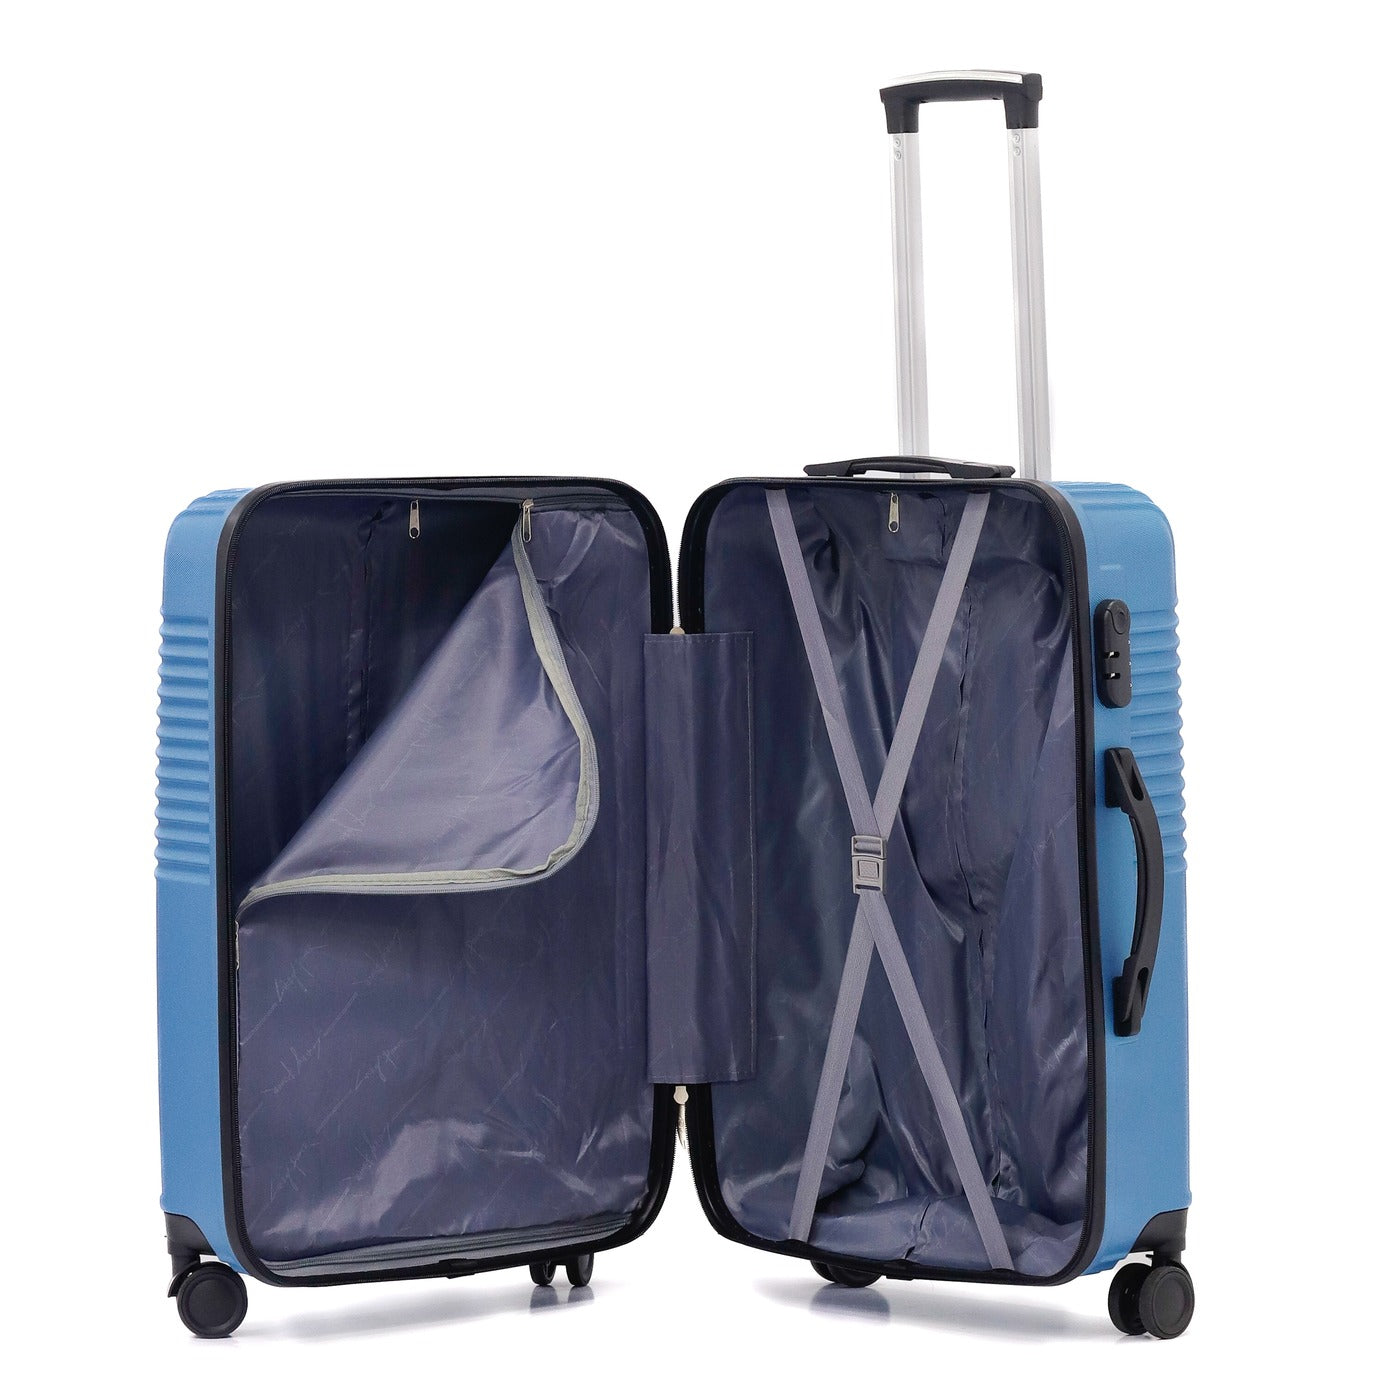 Buy 1 Get 1 Free | Medium Size 24" Lightweight ABS Luggage Bag | Cabin Size FREE | 20-25 Kg Capacity Zaappy